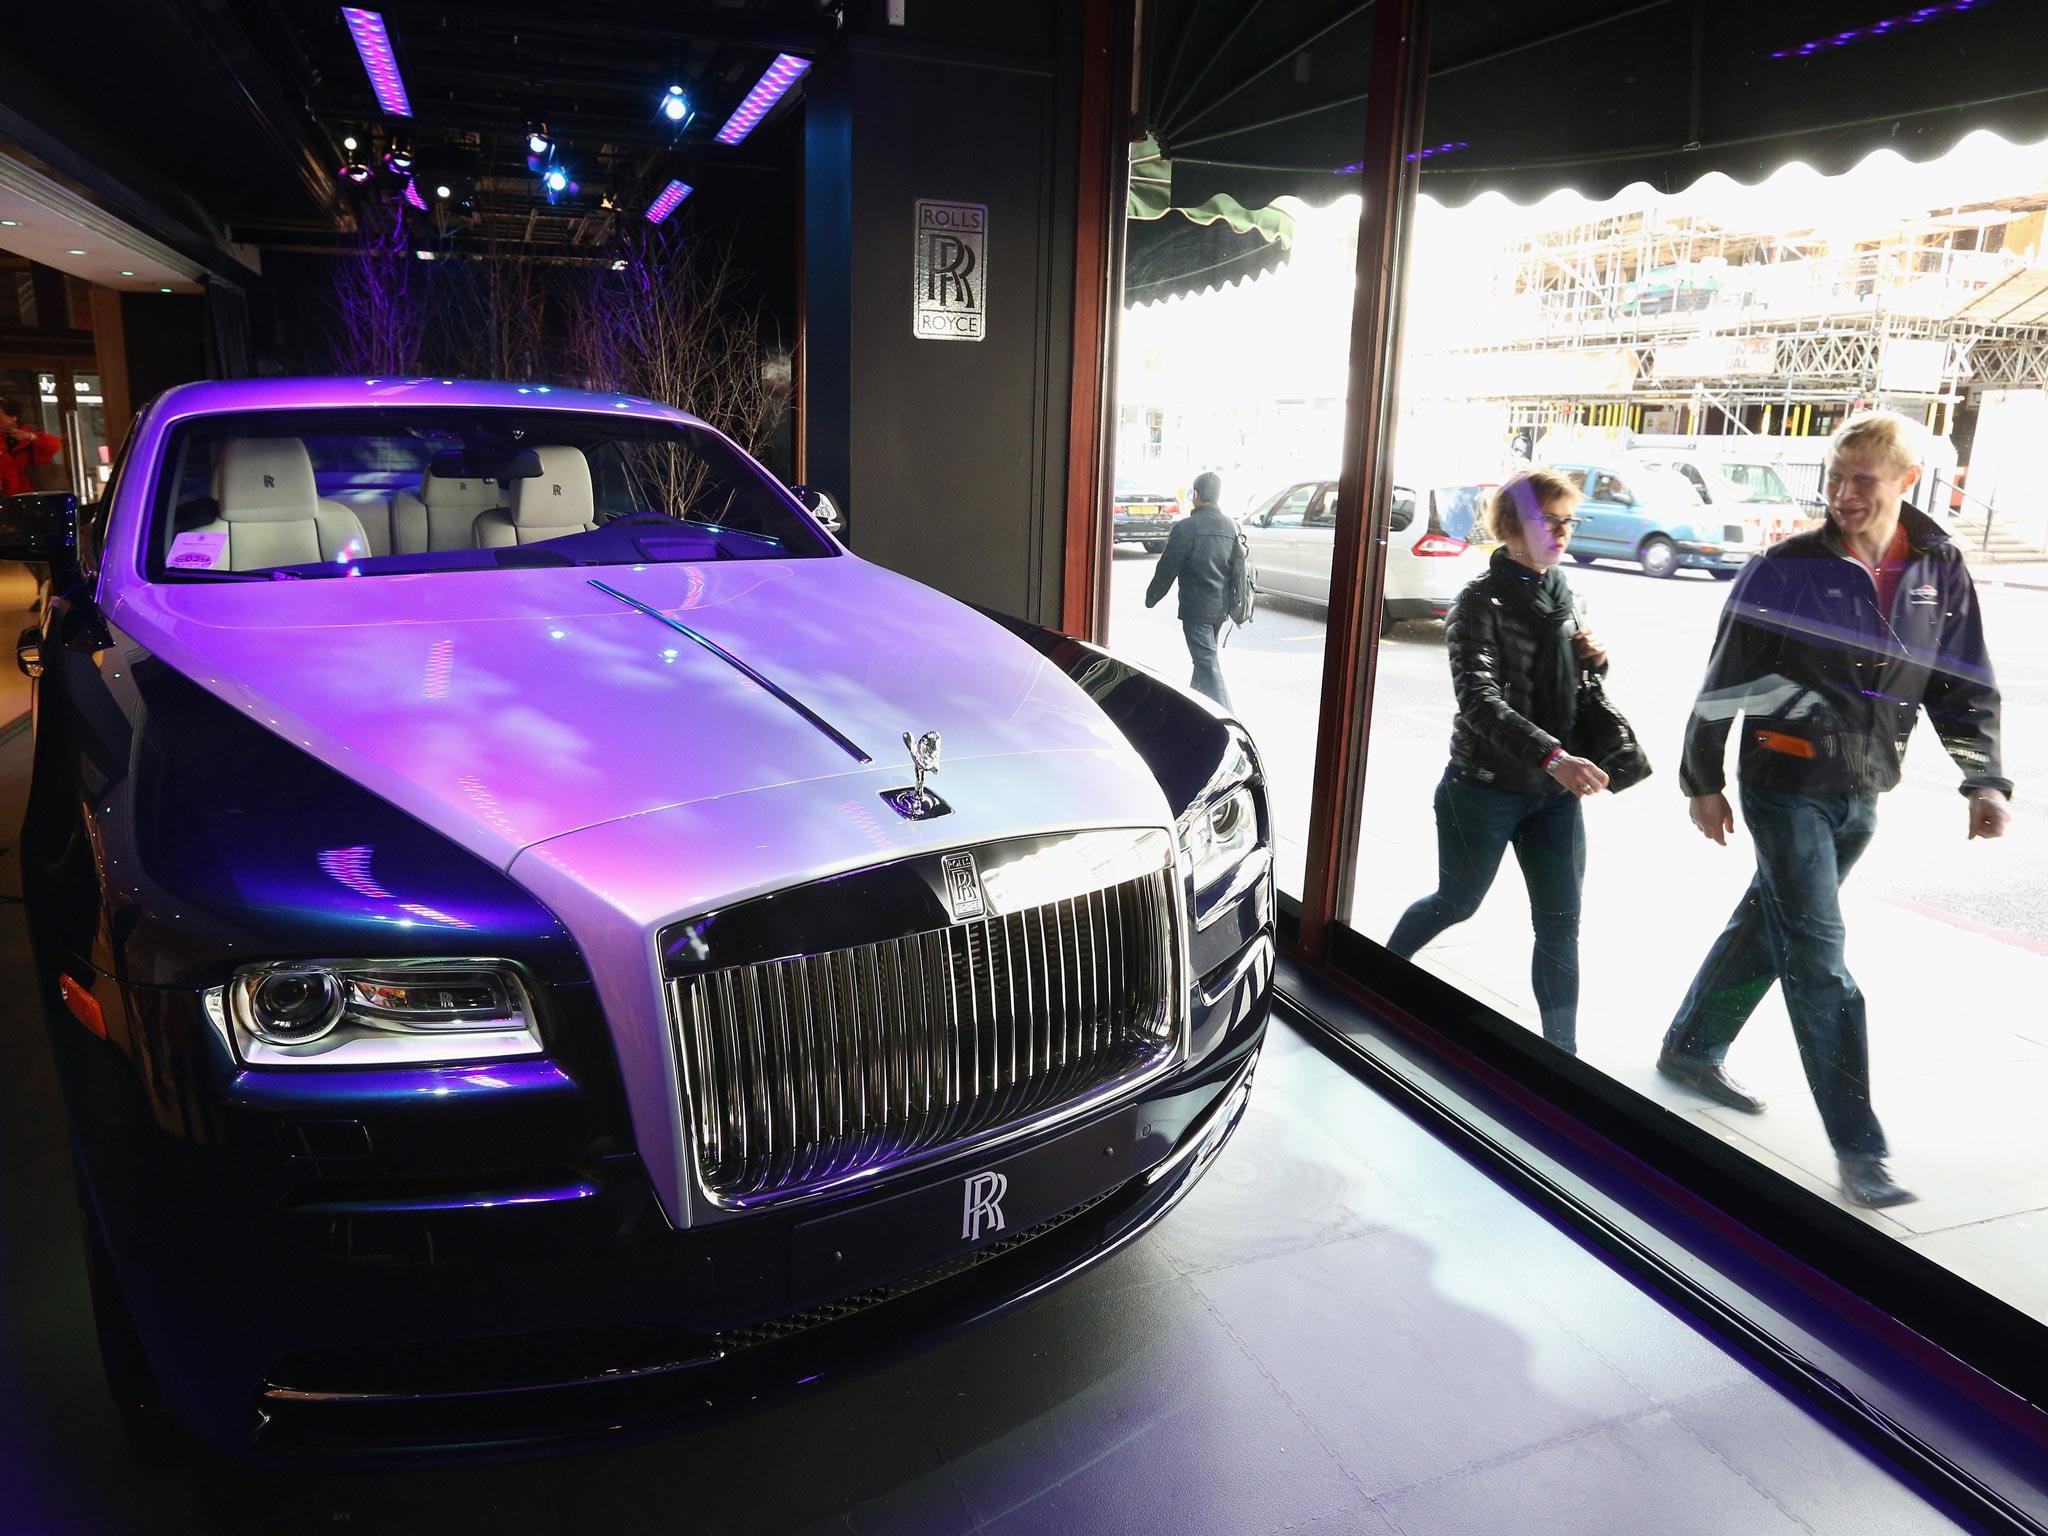 Rich ride: Rolls-Royce developed the Wraith (left) with a younger
clientele in mind